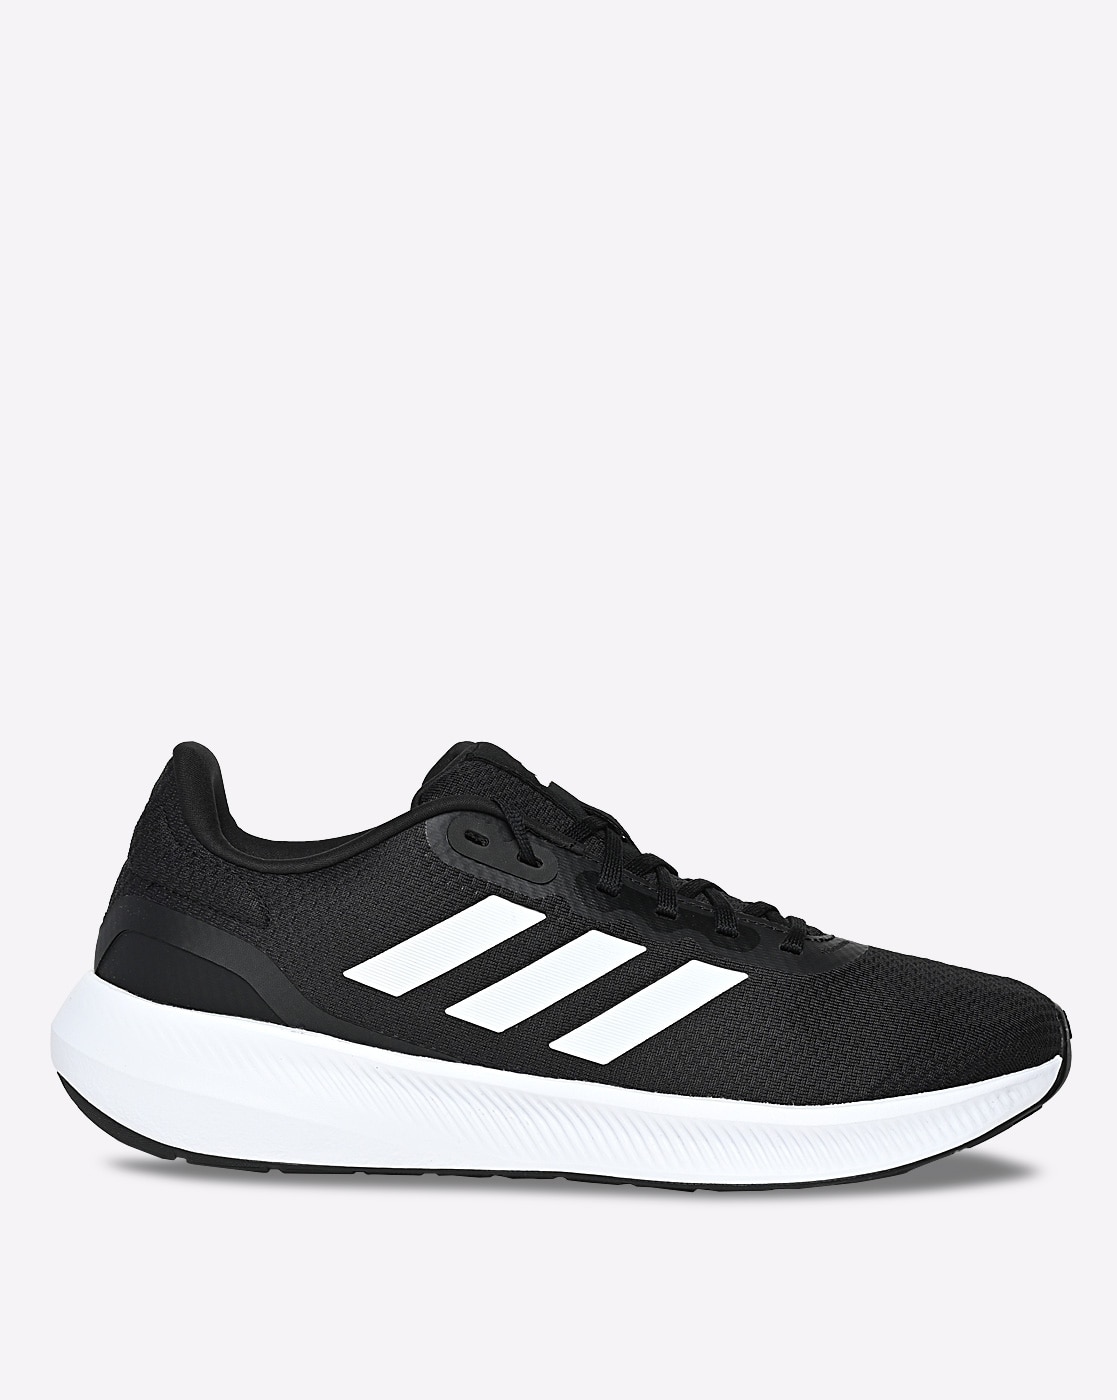 Buy Black Sports Shoes by Online Men for ADIDAS